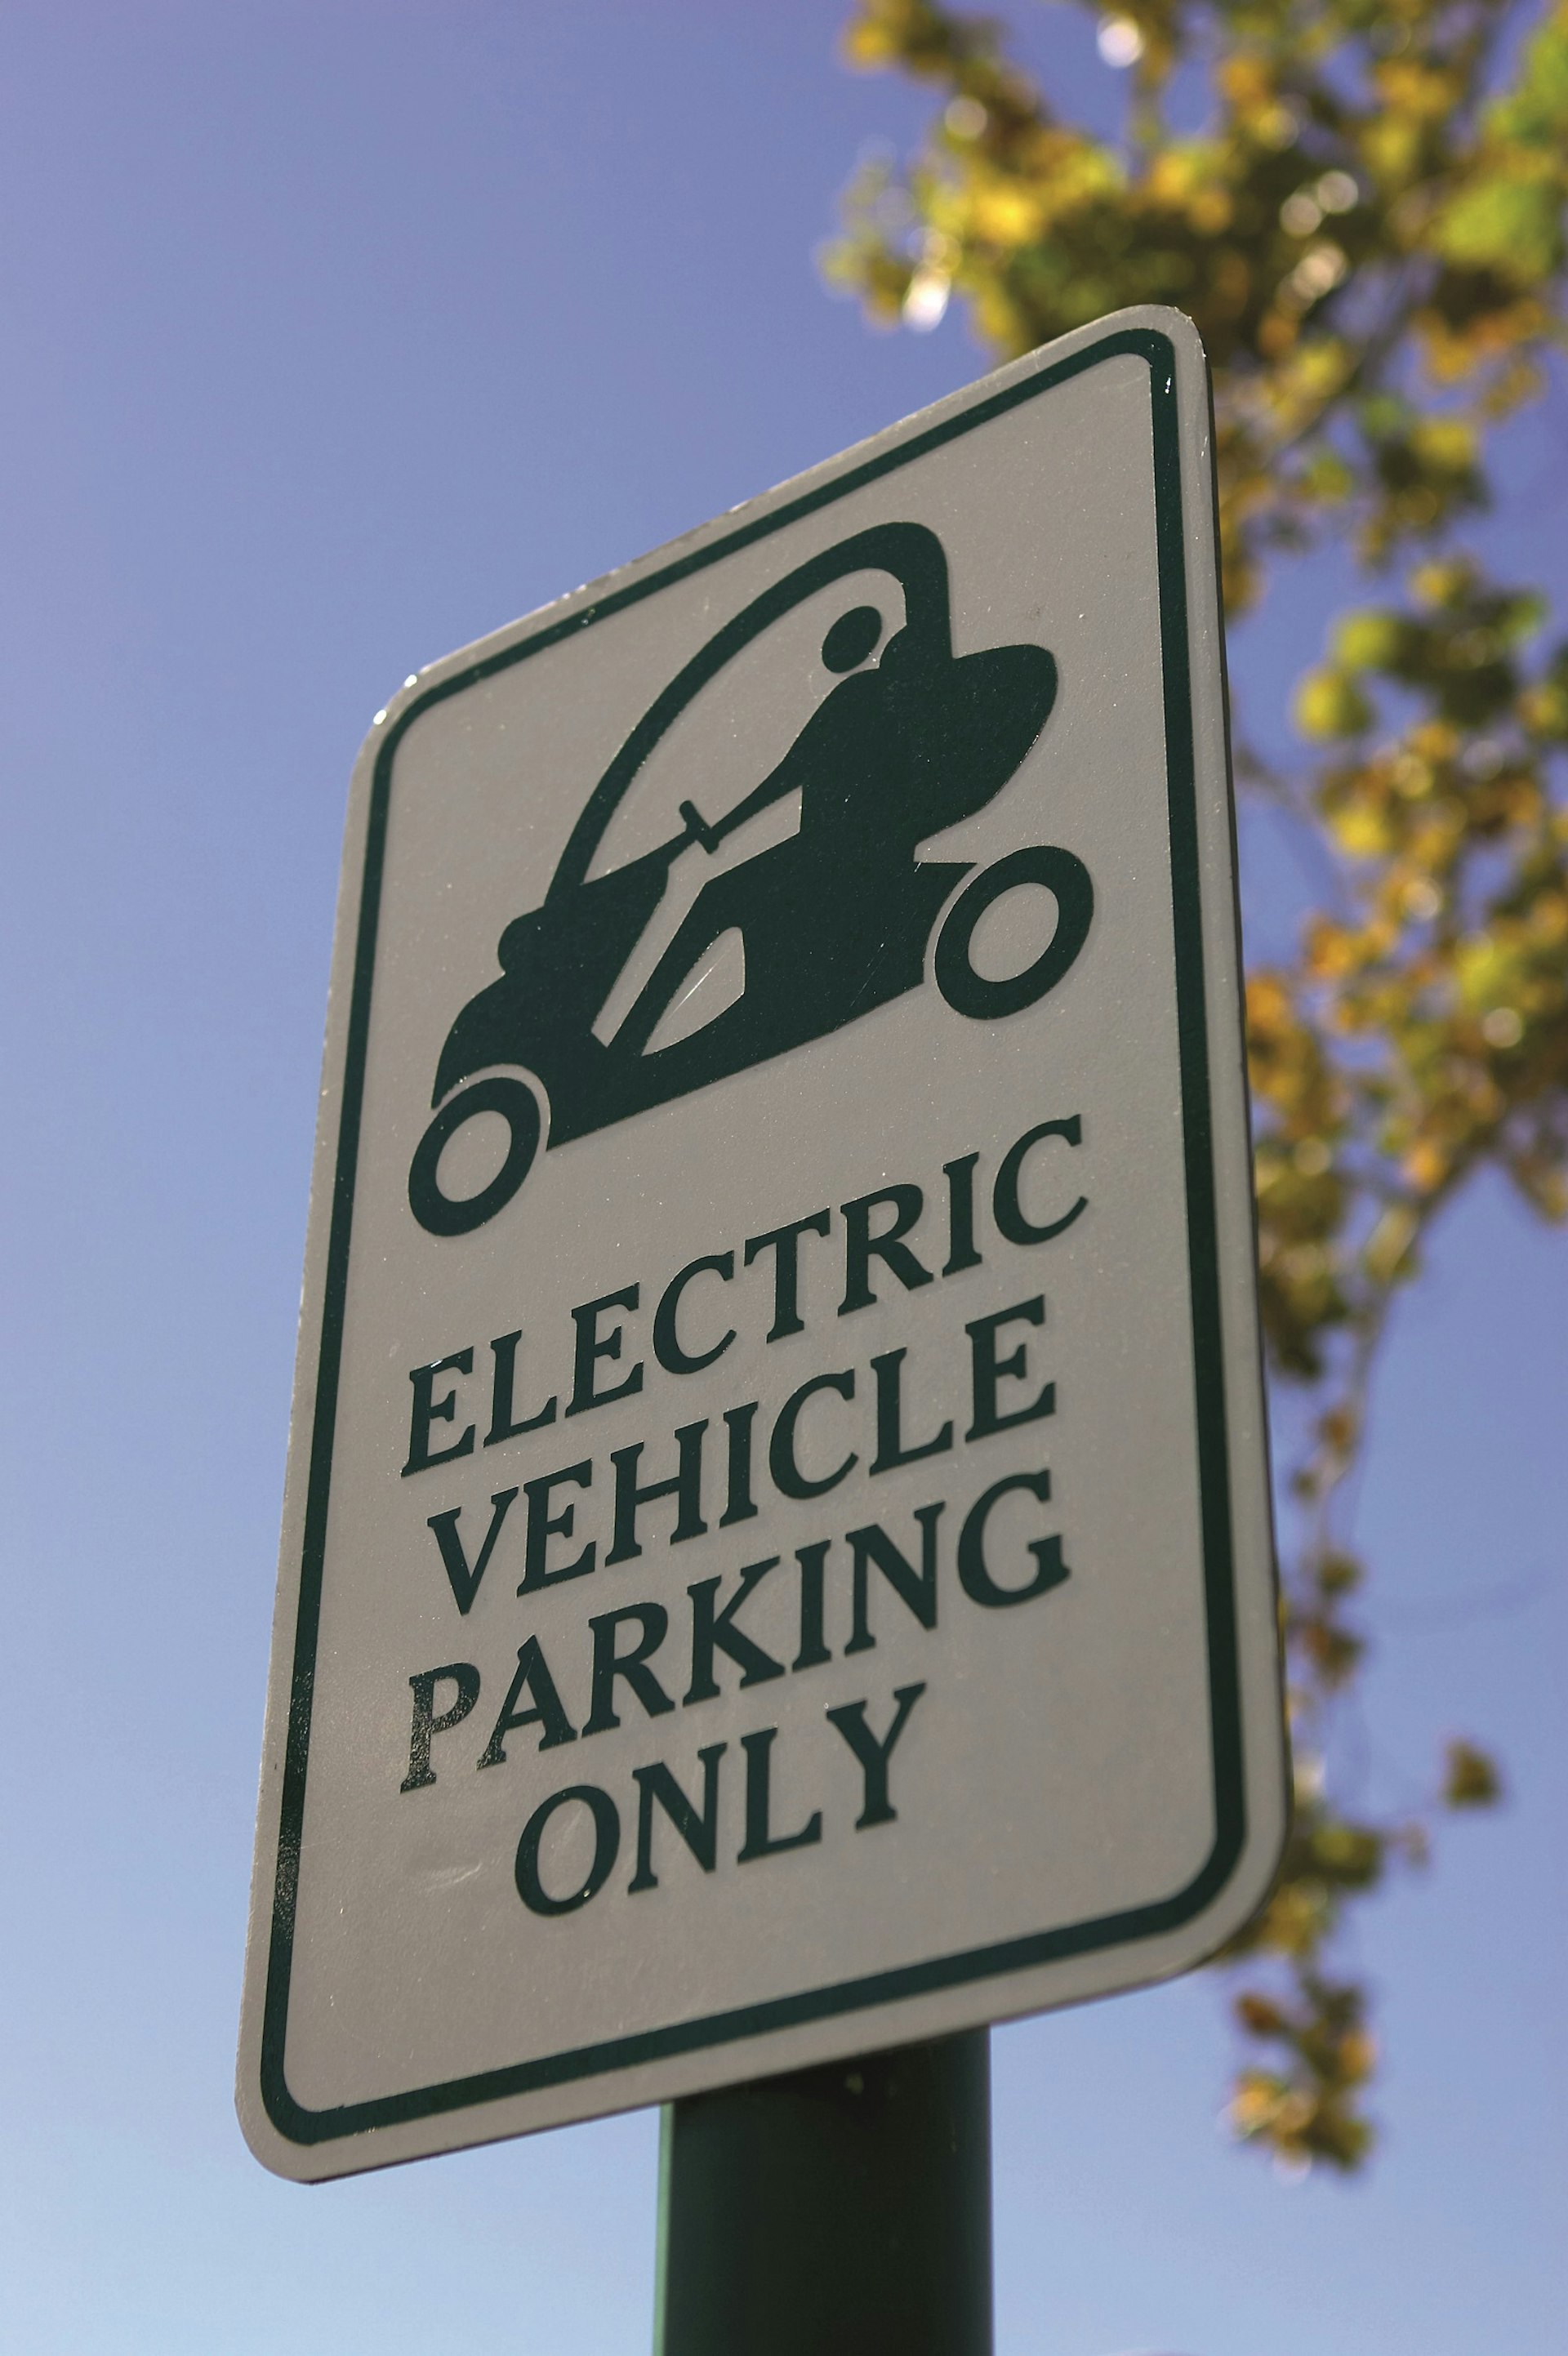 Road sign reading 'electric vehicle parking only' © Jeff Gynane / Alamy